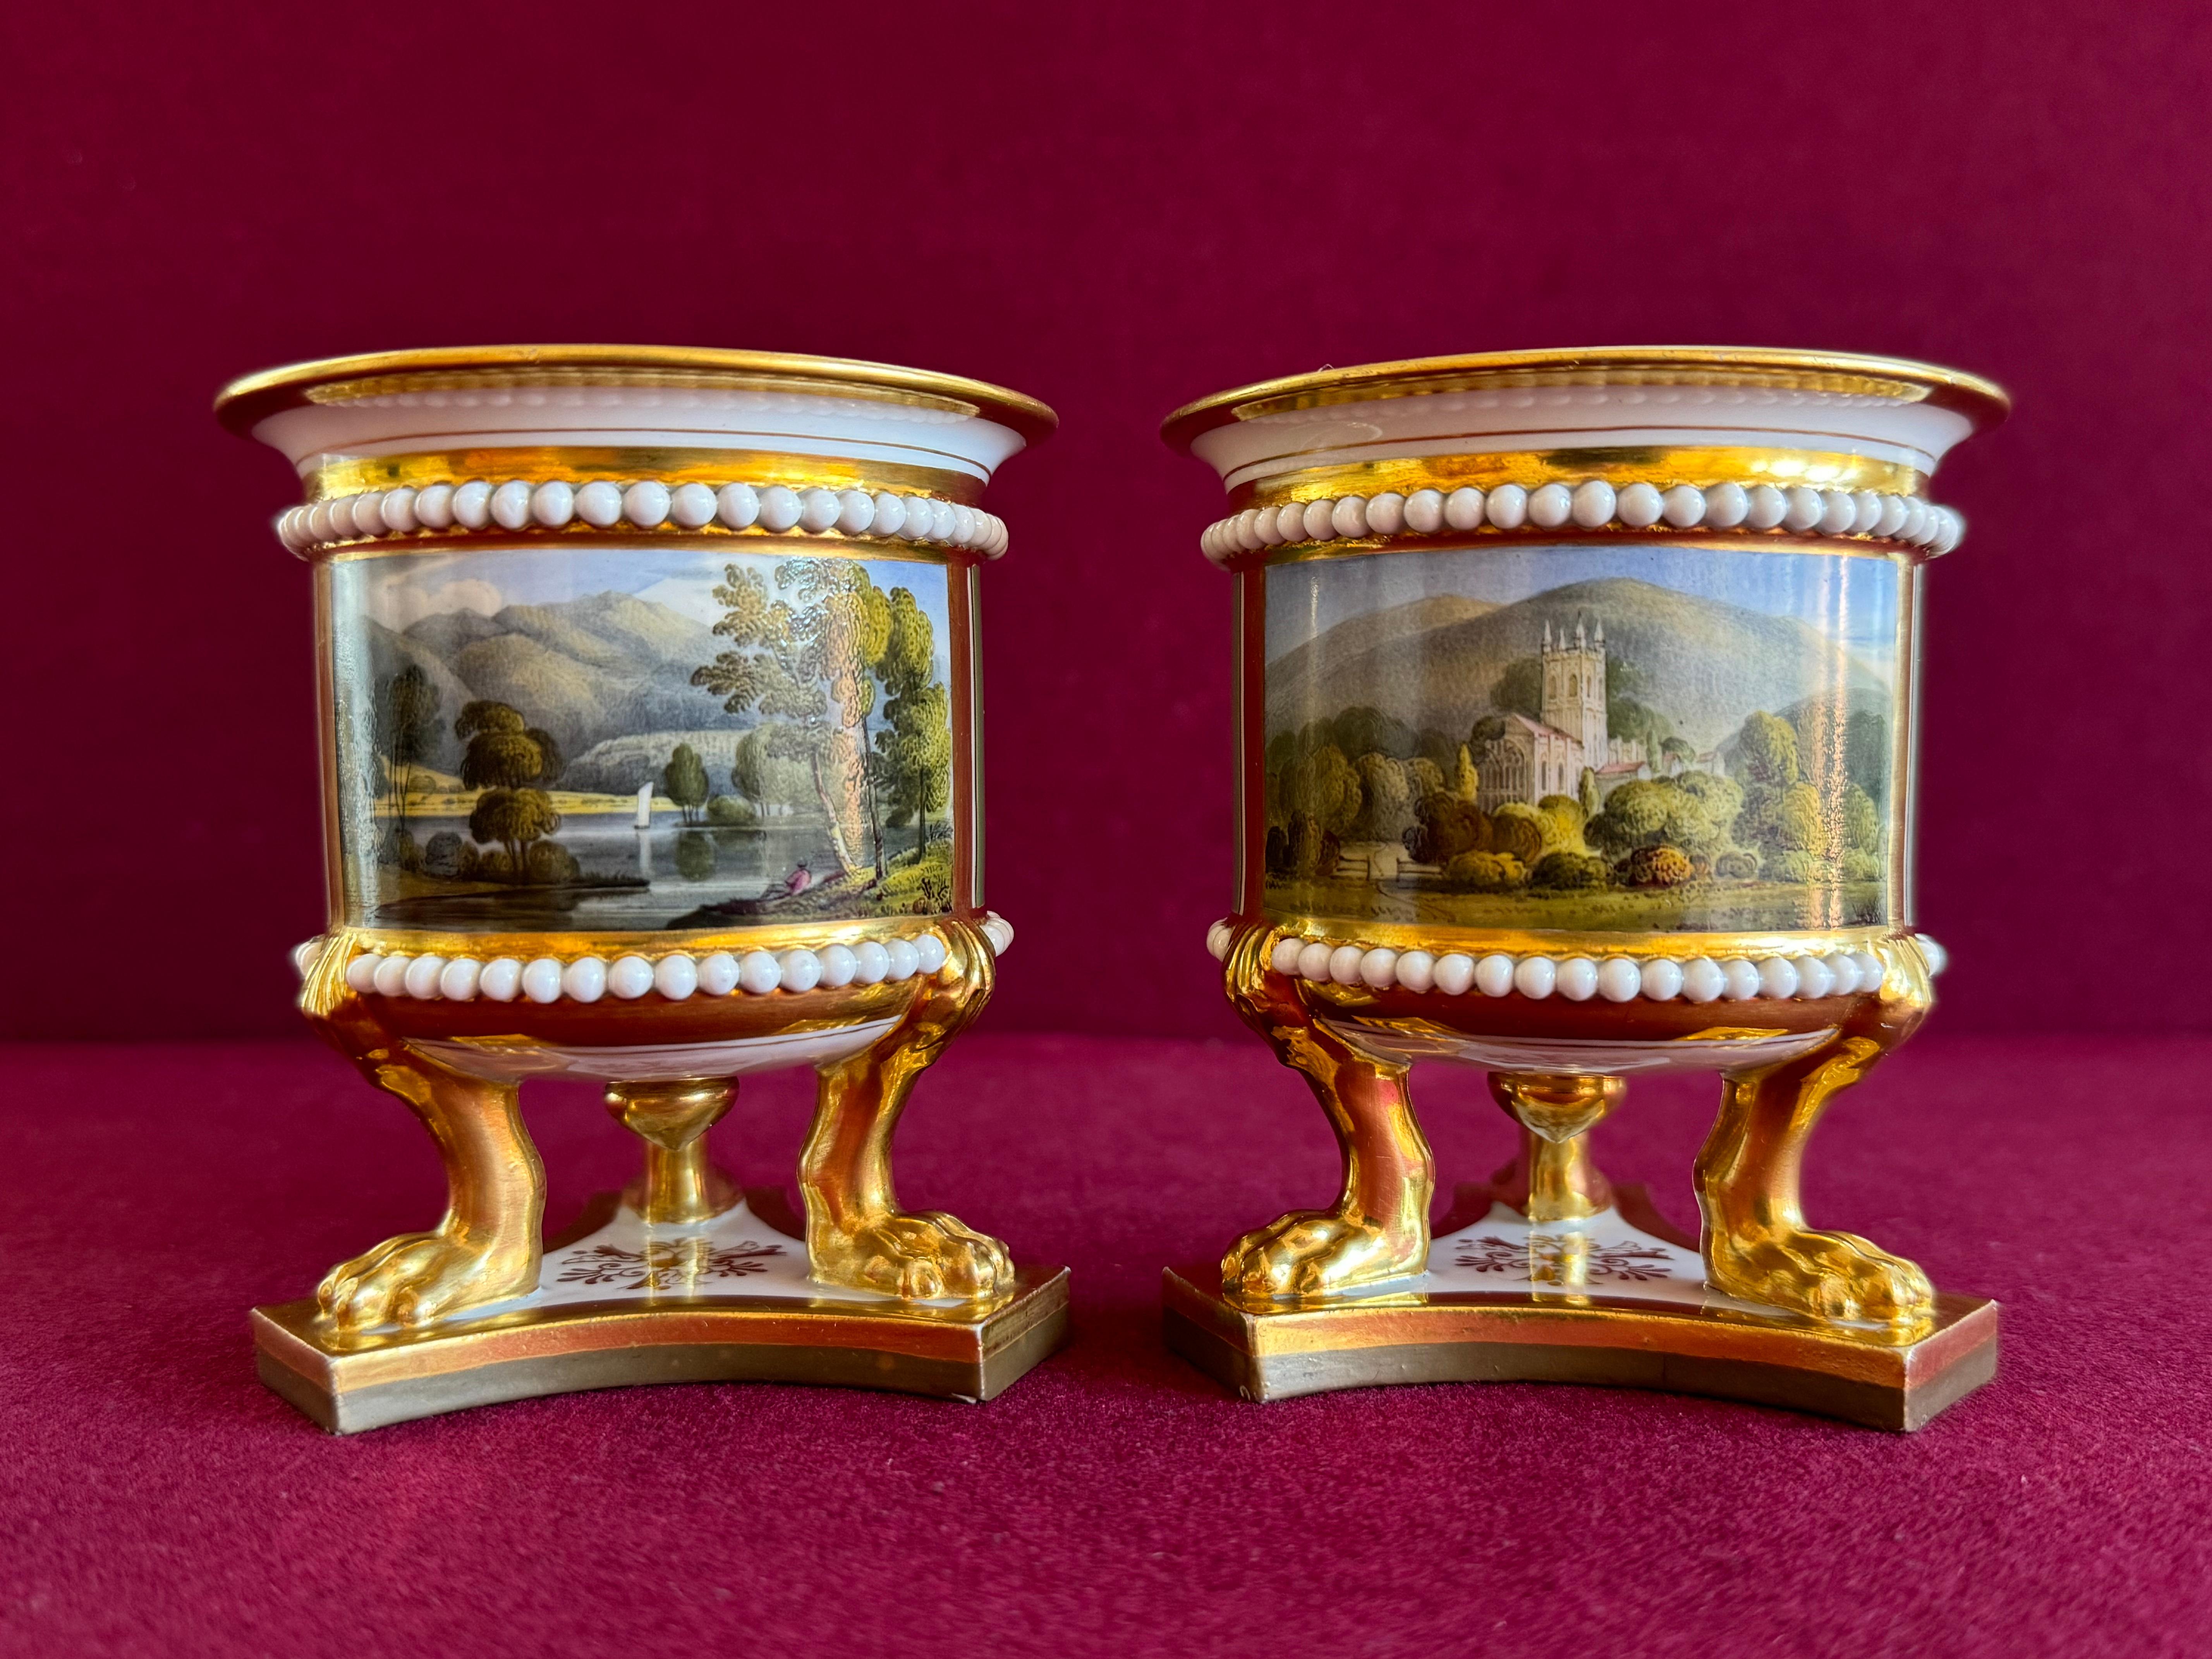 A fine pair of Flight, Barr and Barr Worcester Porcelain Vases c.1820. Of superb quality, each with bands of applied white ‘pearls’ and with a panel painted with views of 'Malvern Church Worcester' and 'Keswick Lake' reserved on a green ground, and